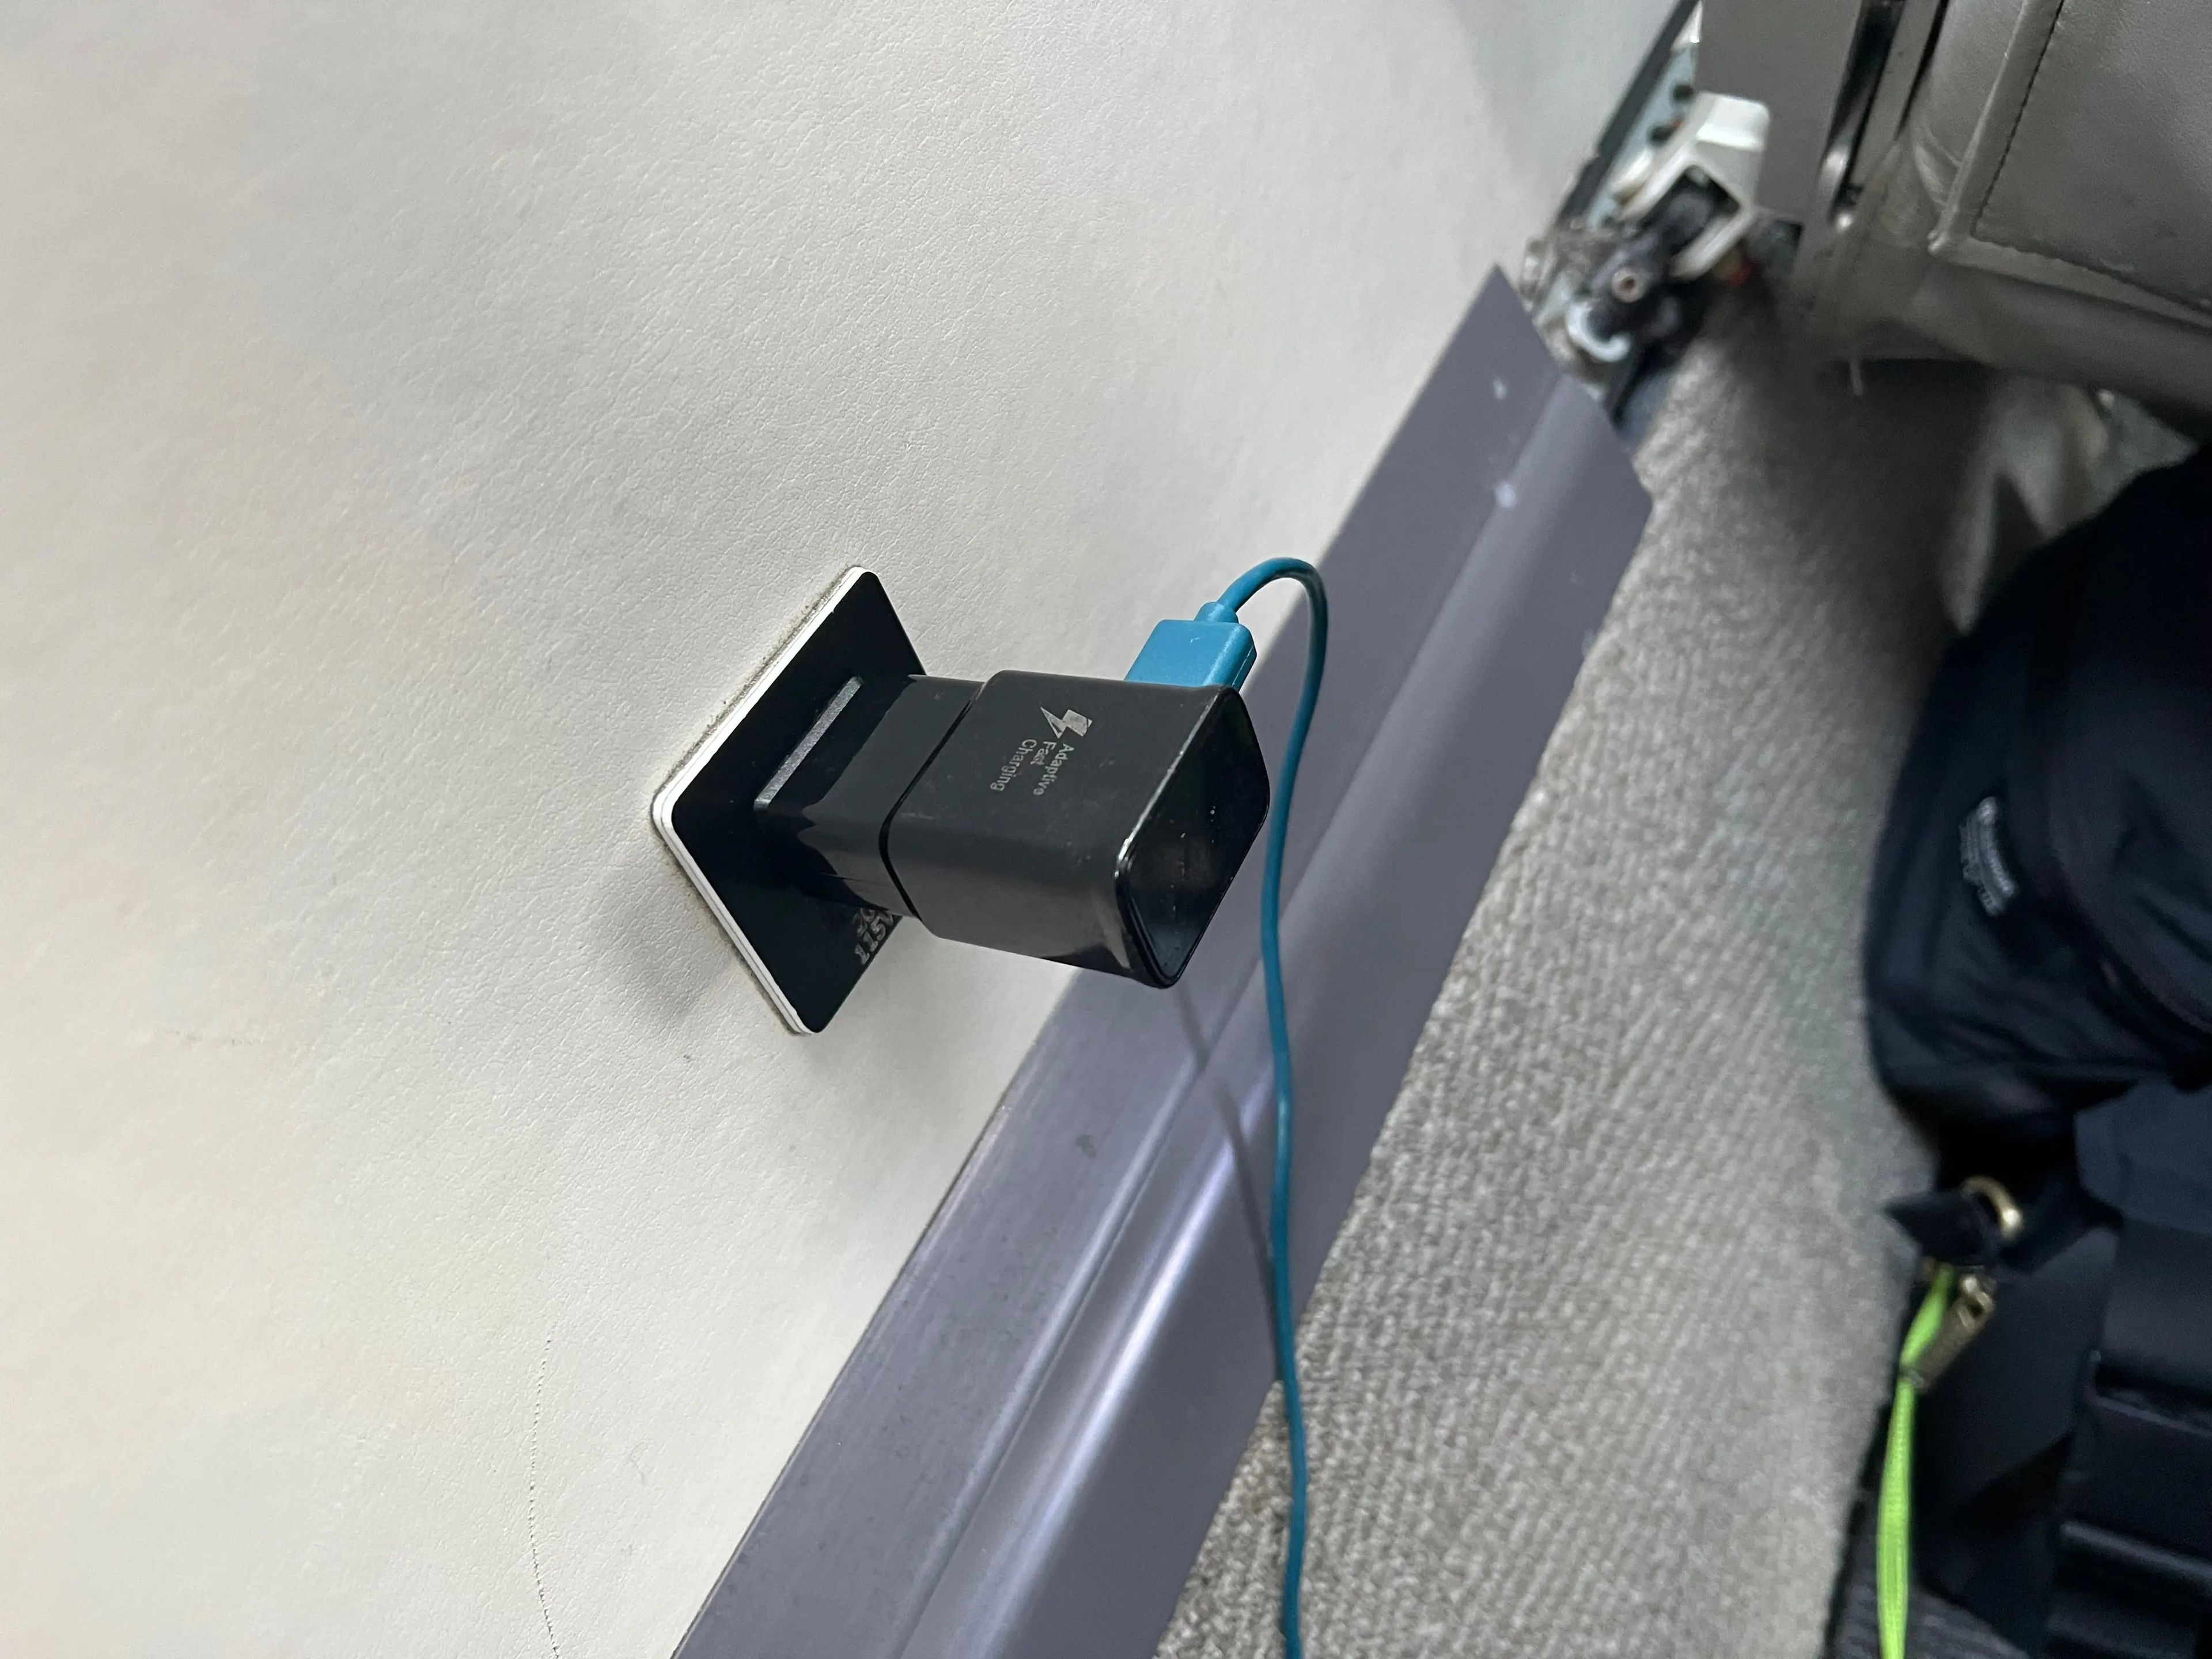 The author's cord plugged into the outlet on the wall of the fuselage.